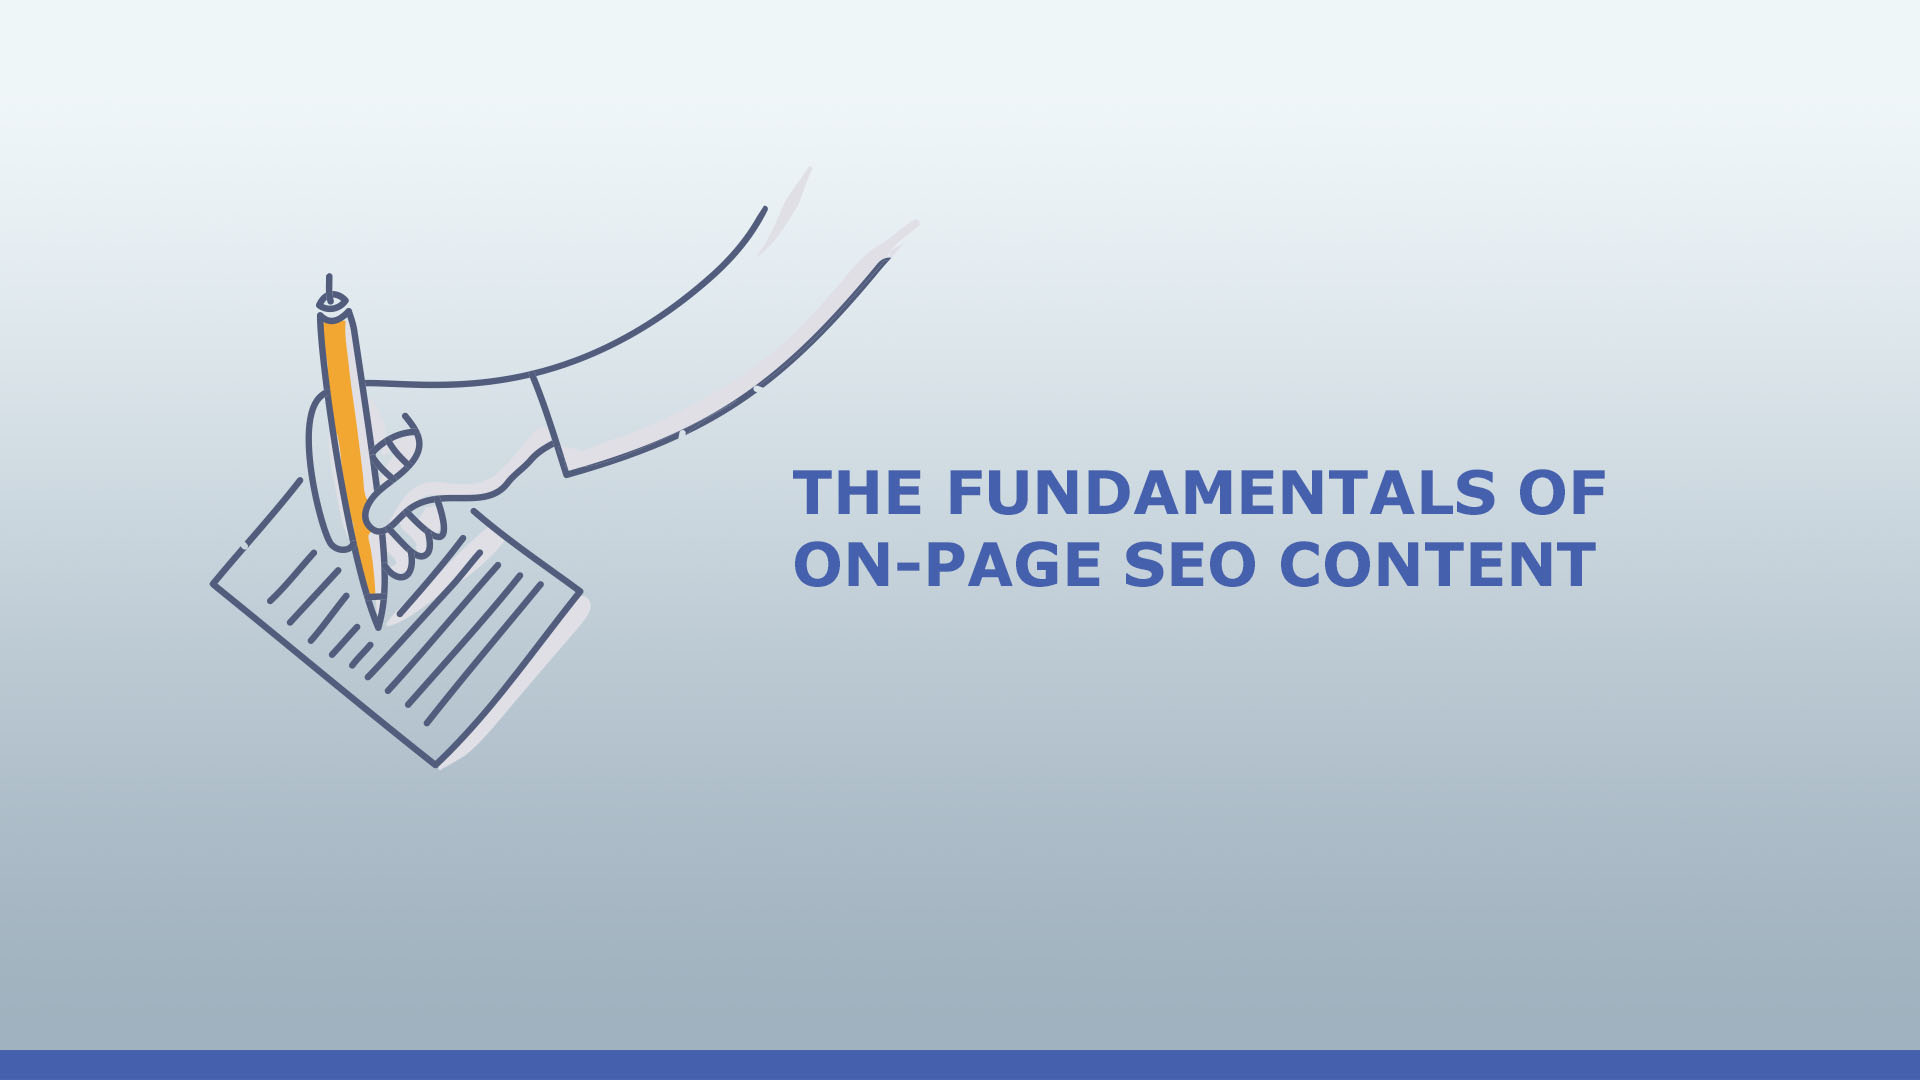 The fundamentals of on-page SEO